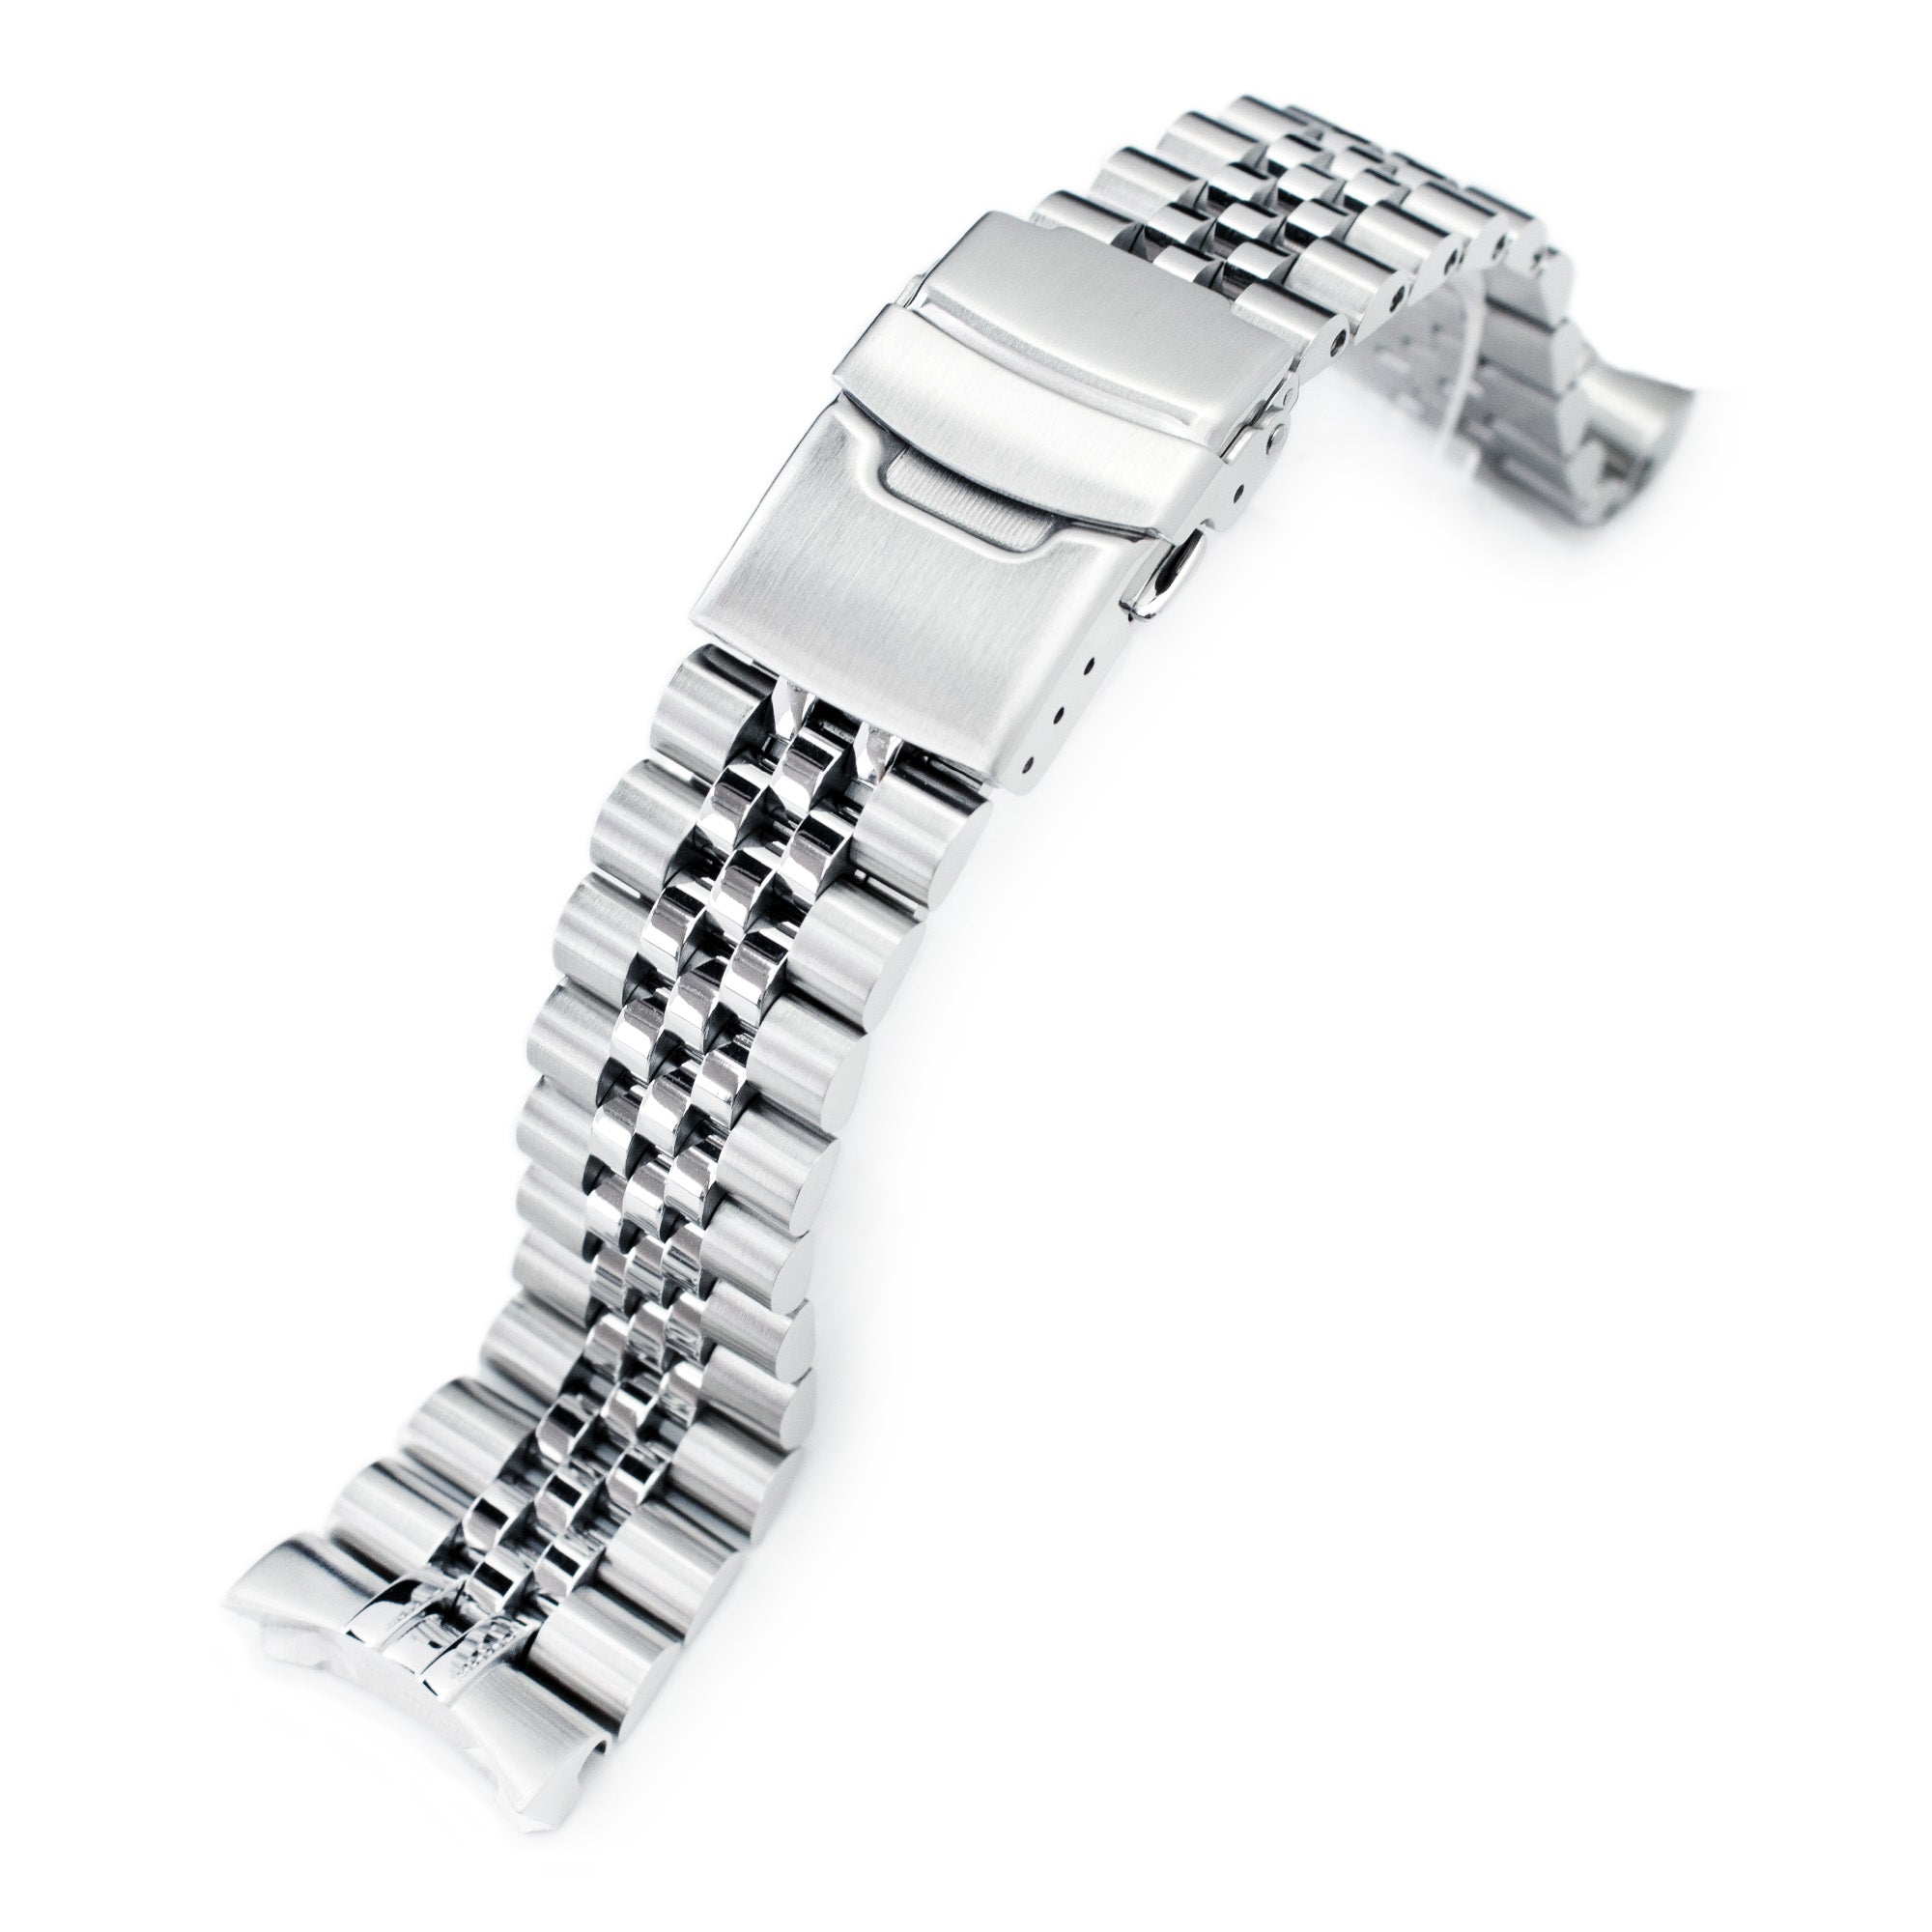 22mm Seiko SKX007 Watch Band Super-J Louis JUB 316L Stainless Steel -  Strapcode